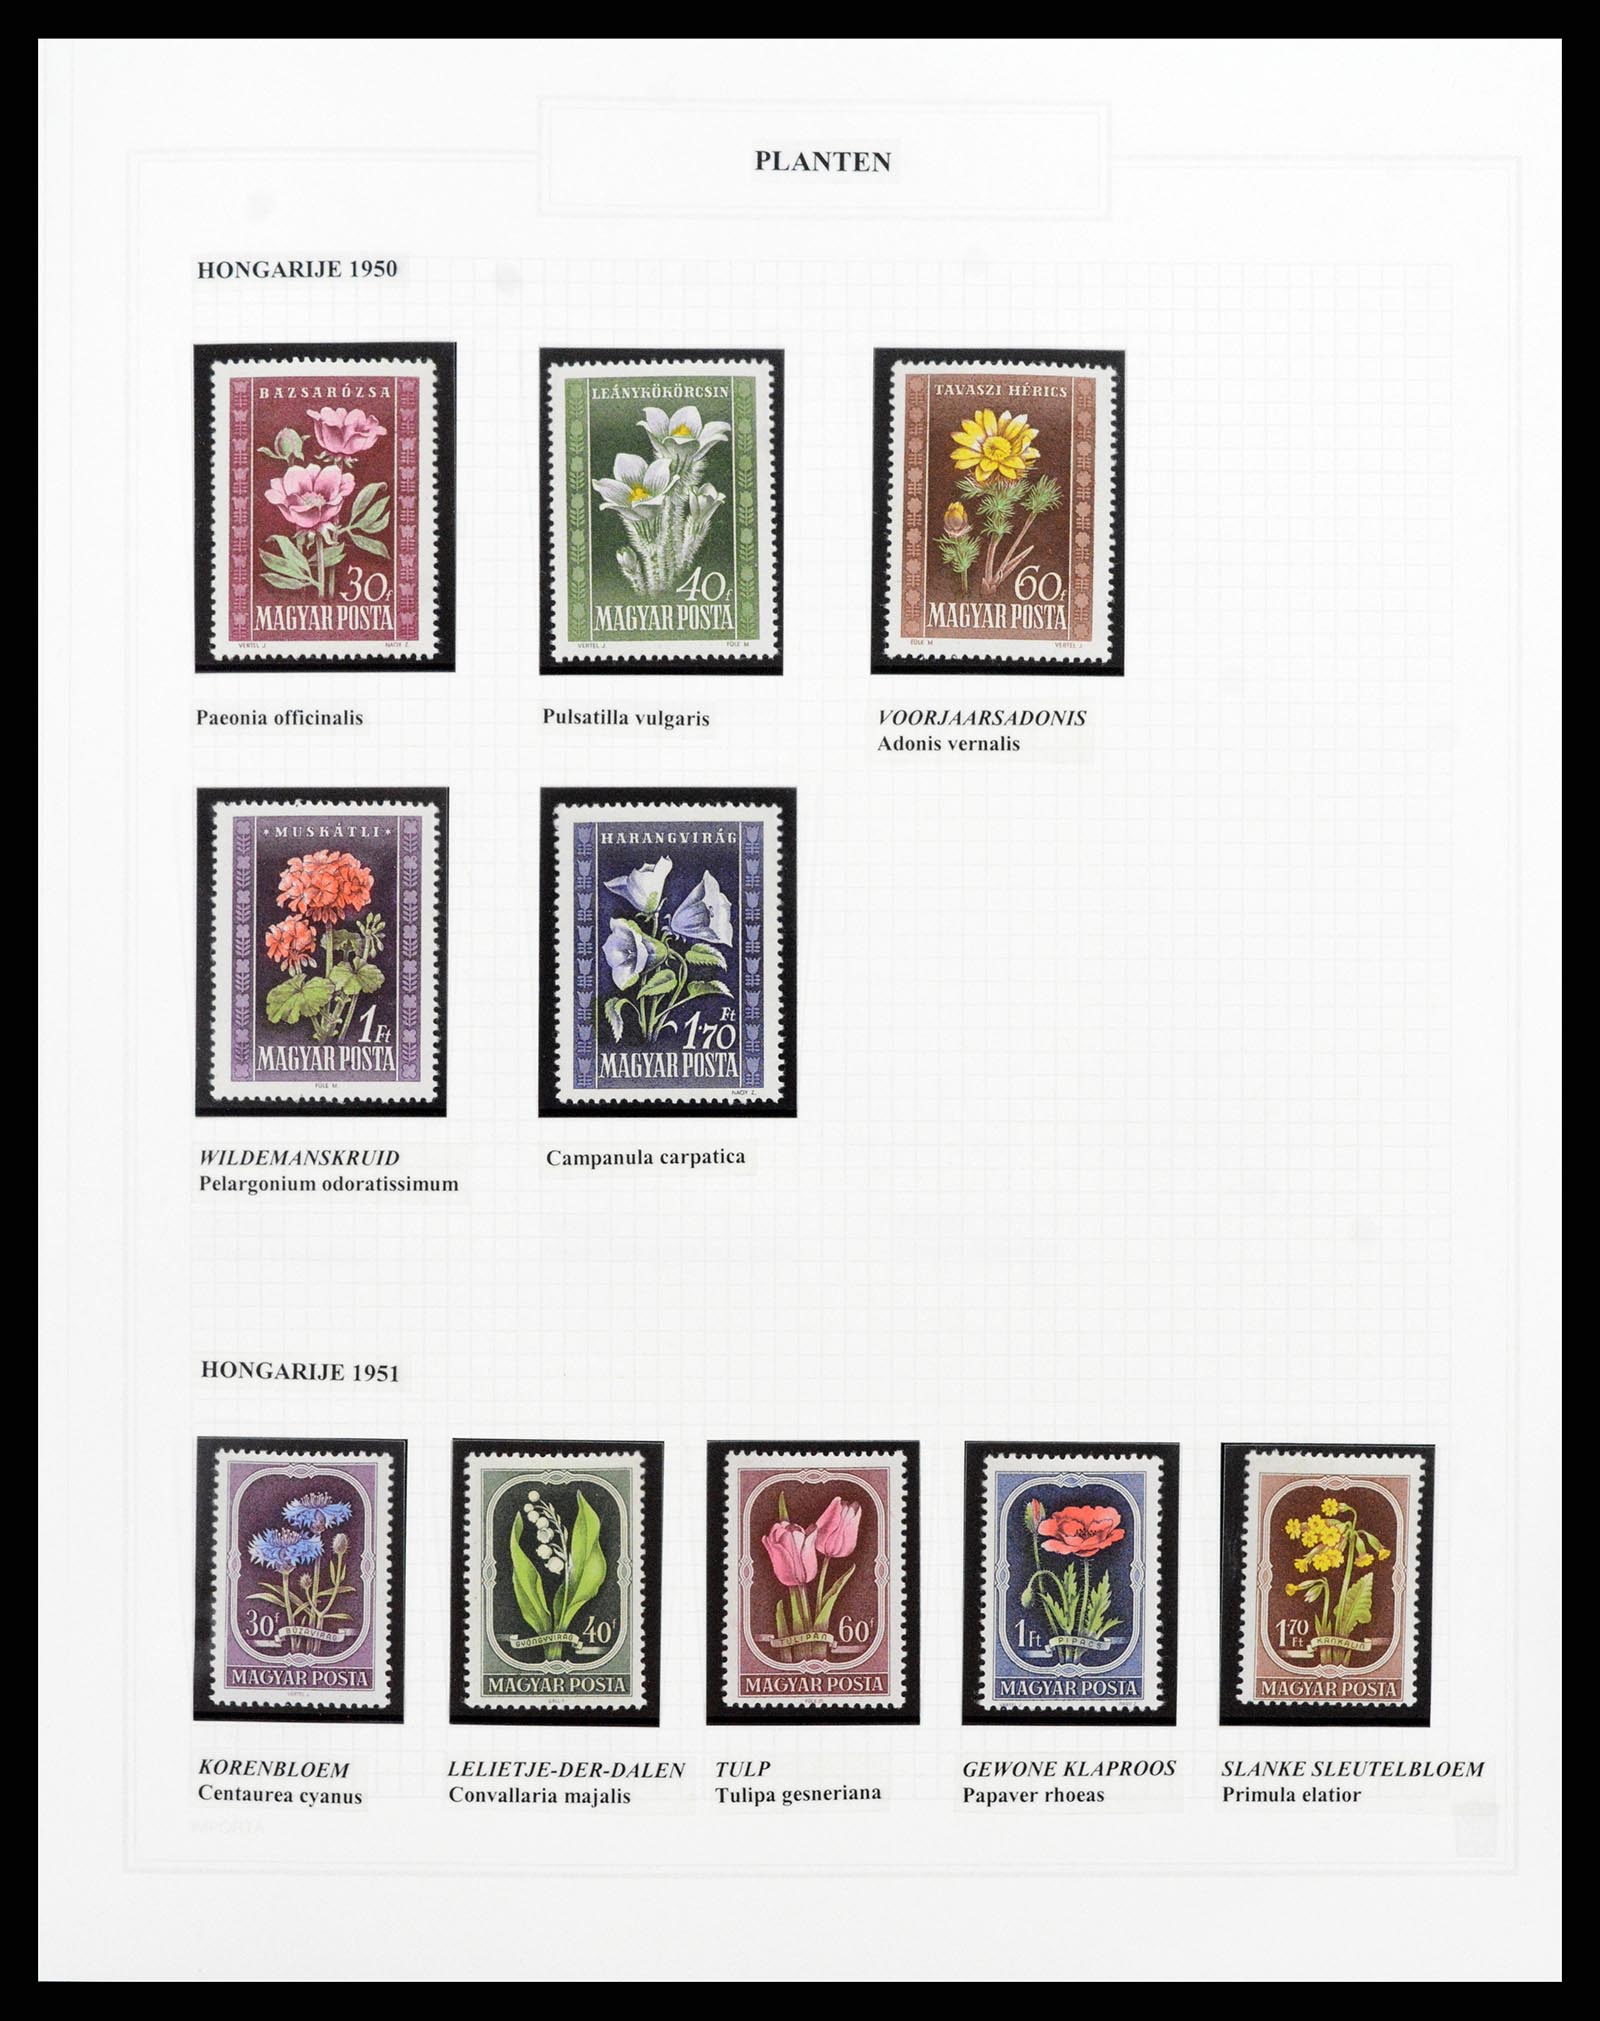 37298 072 - Stamp collection 37298 Theme Flora 1953-2000.